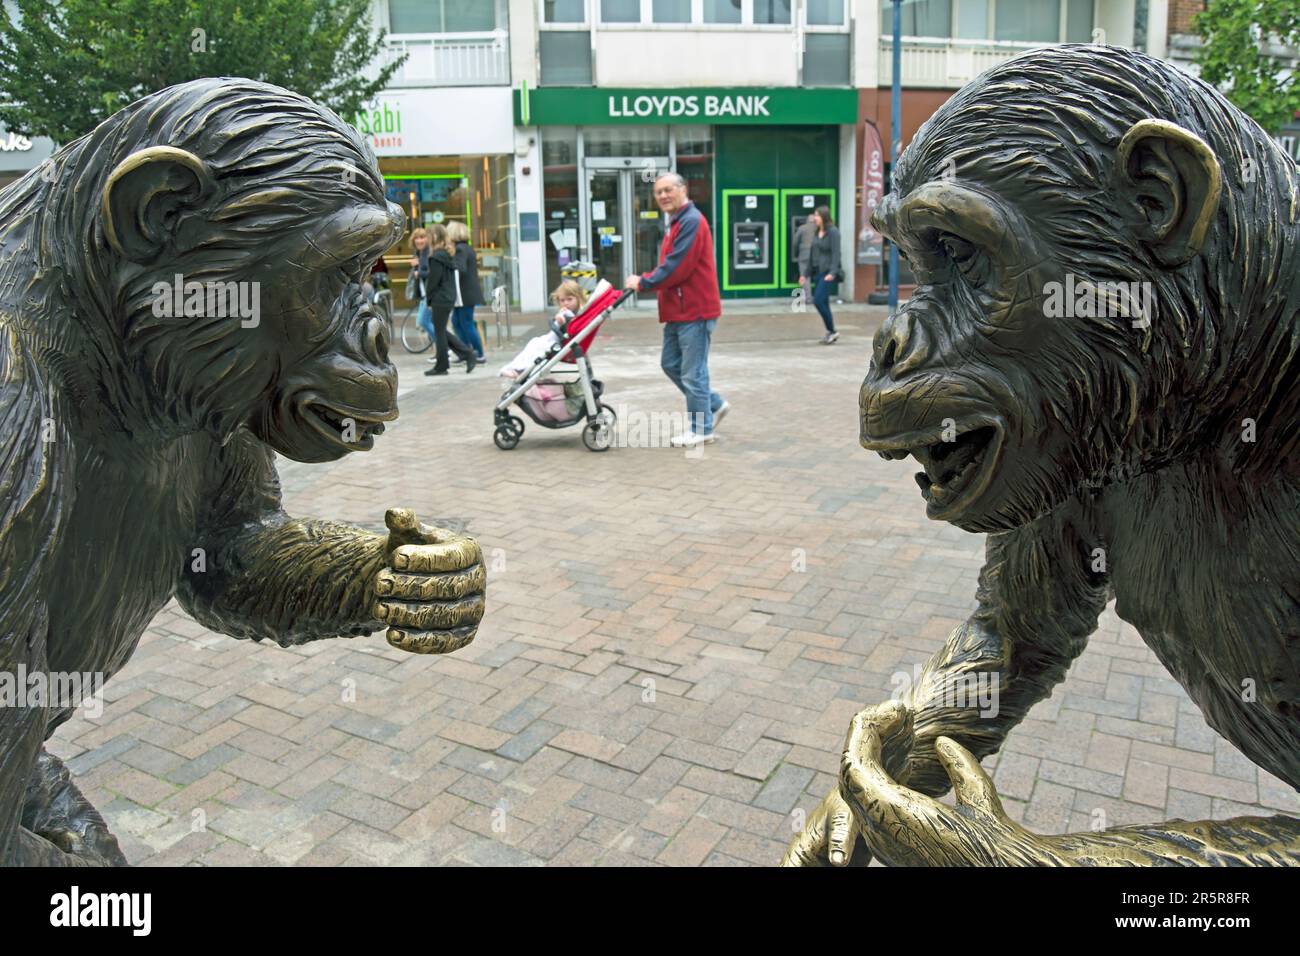 wild chimp conflict, a bronze sculpture by gillie and marc, depicting fighting chimps, called alex and owen, in kingston upon thames, surrey, england Stock Photo